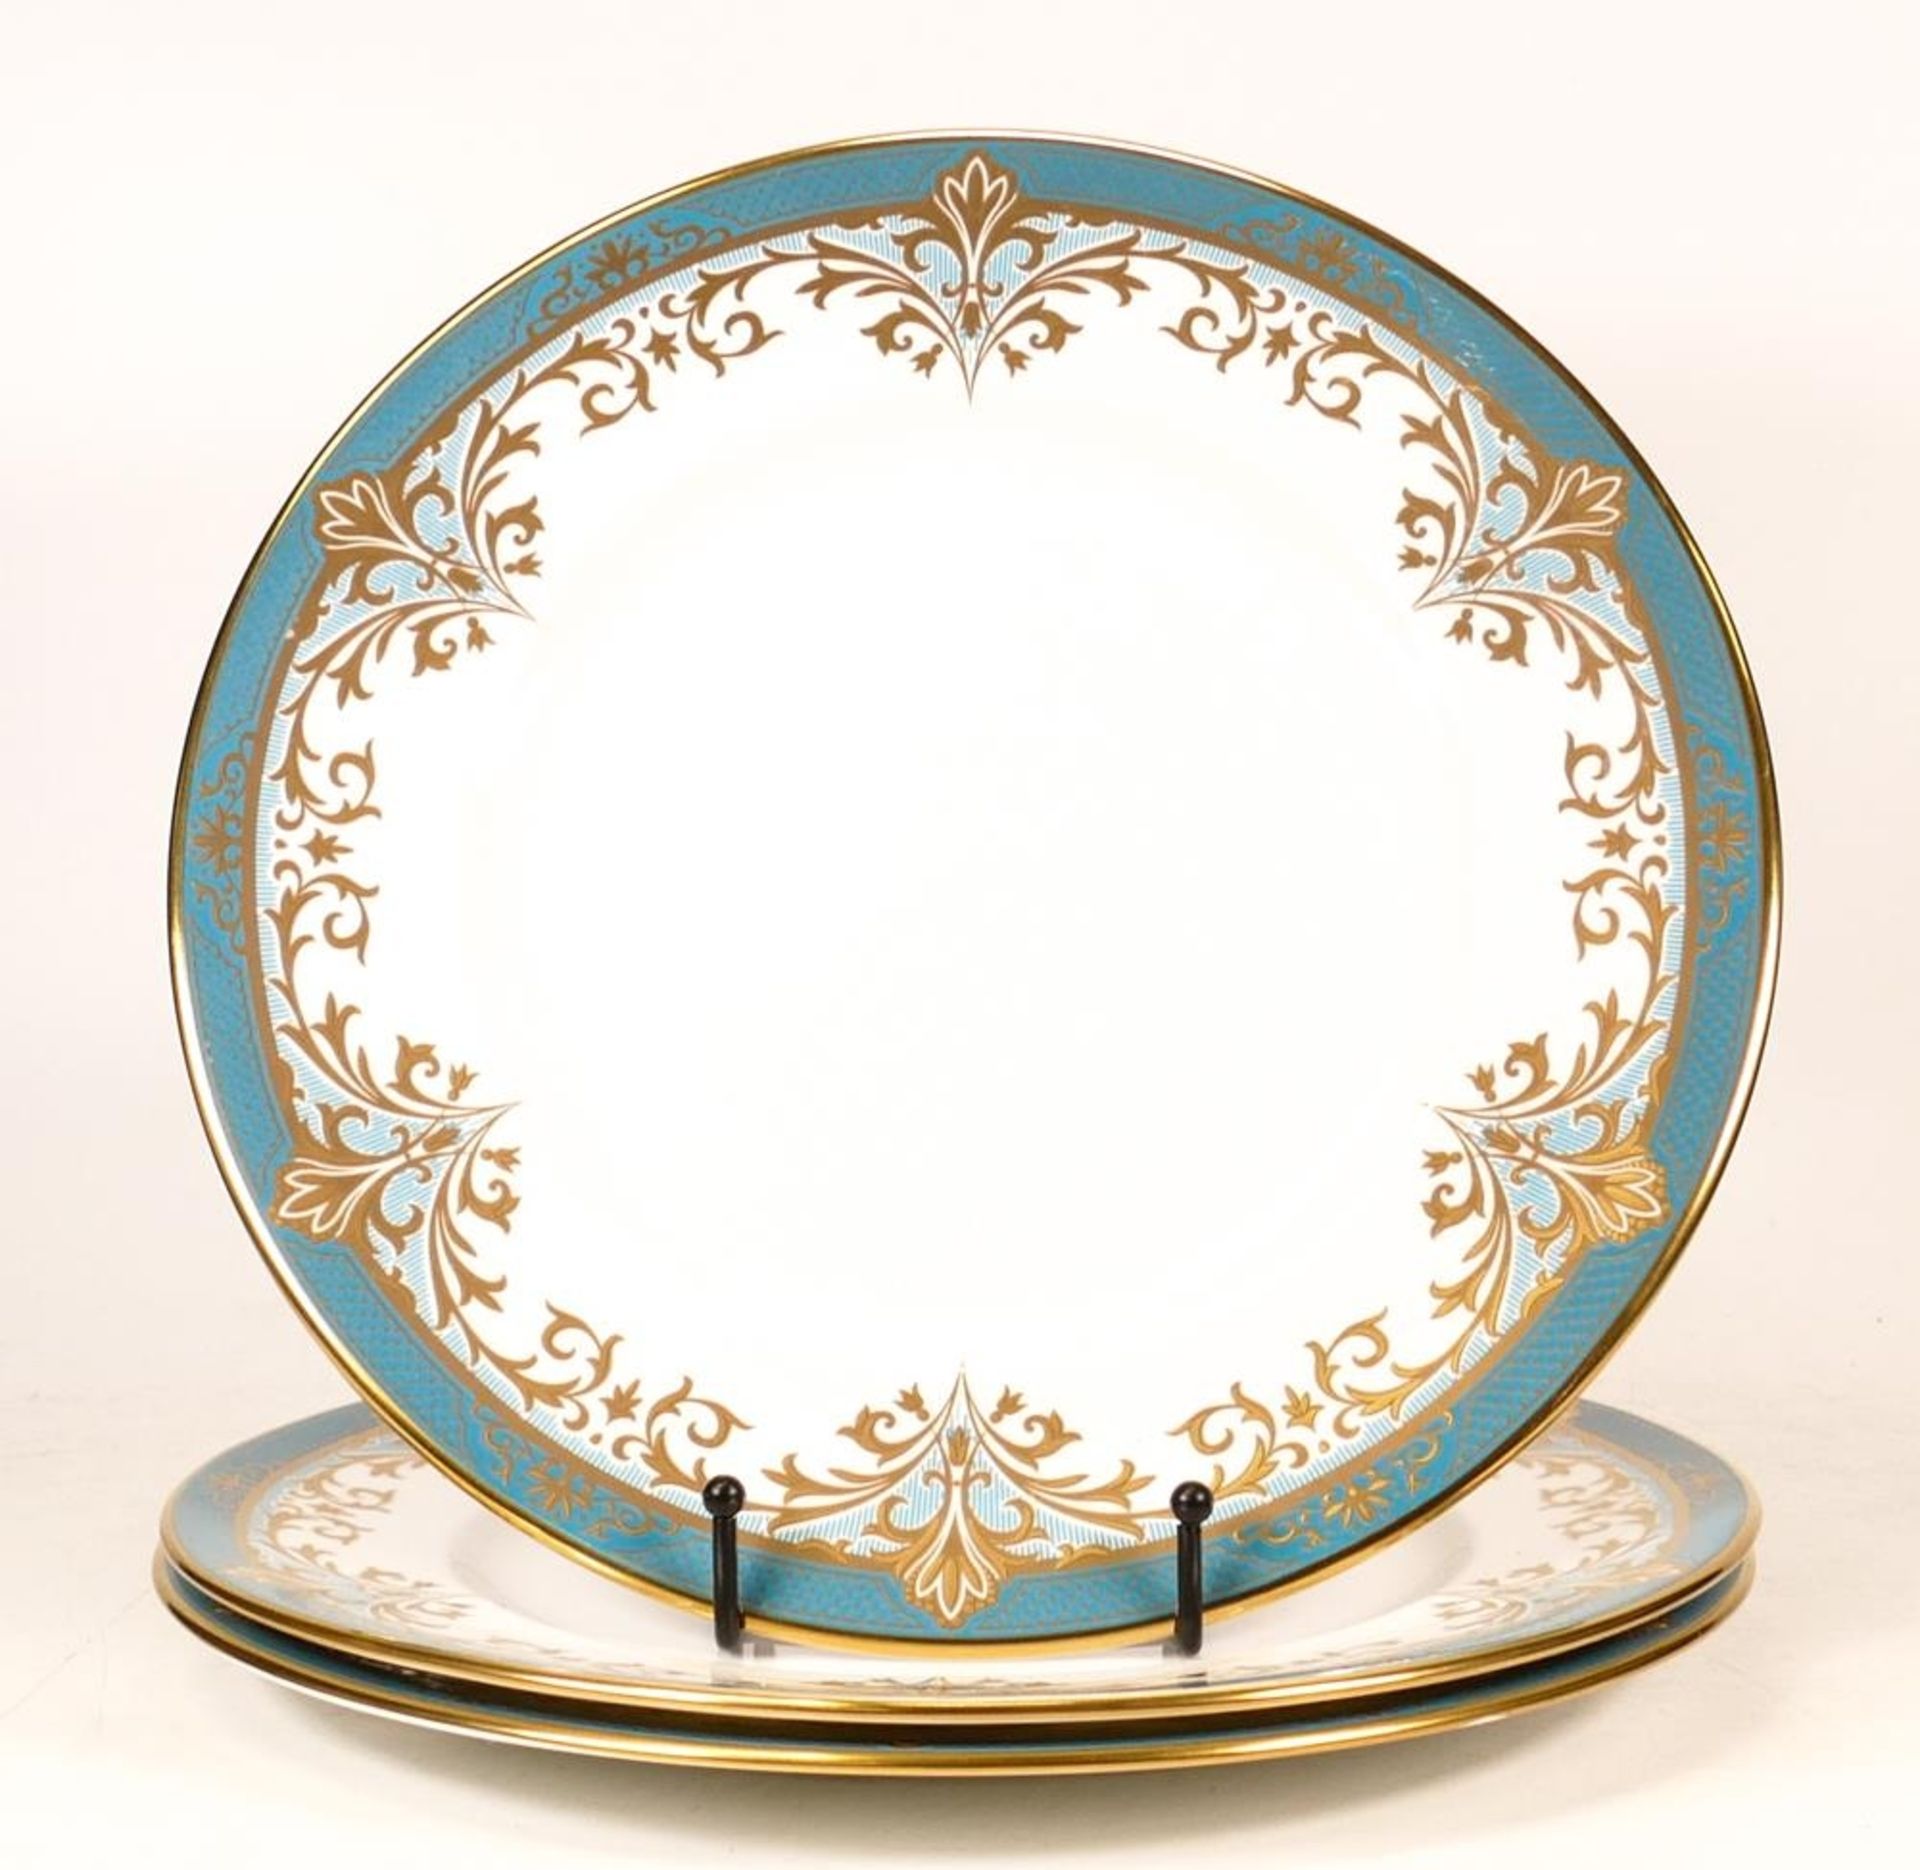 De Lamerie Fine Bone China heavily gilded Turquoise Rimmed Plates, specially made high end quality